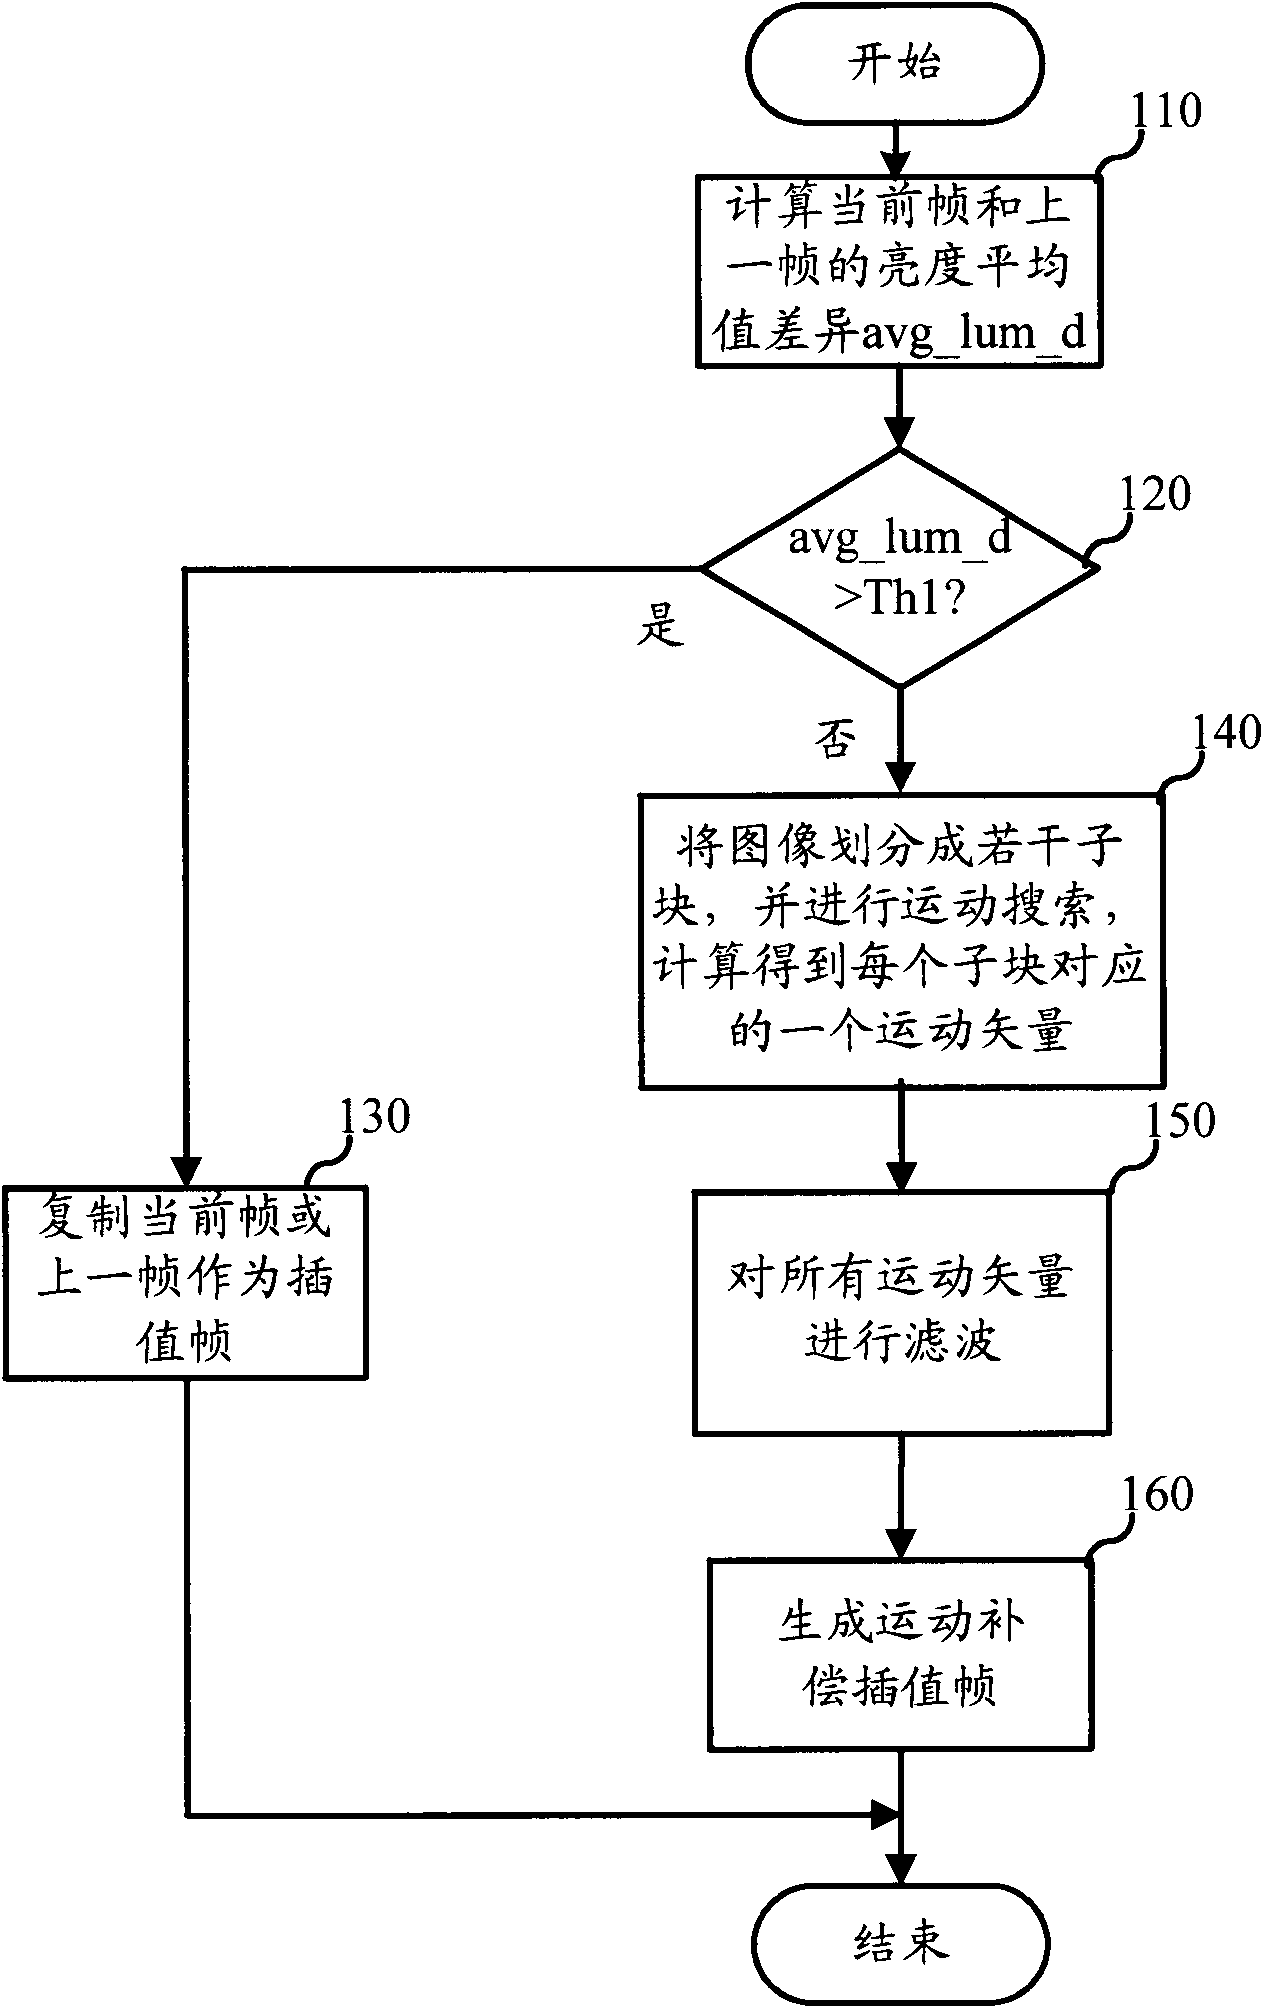 Method and device for generating video interpolation frame